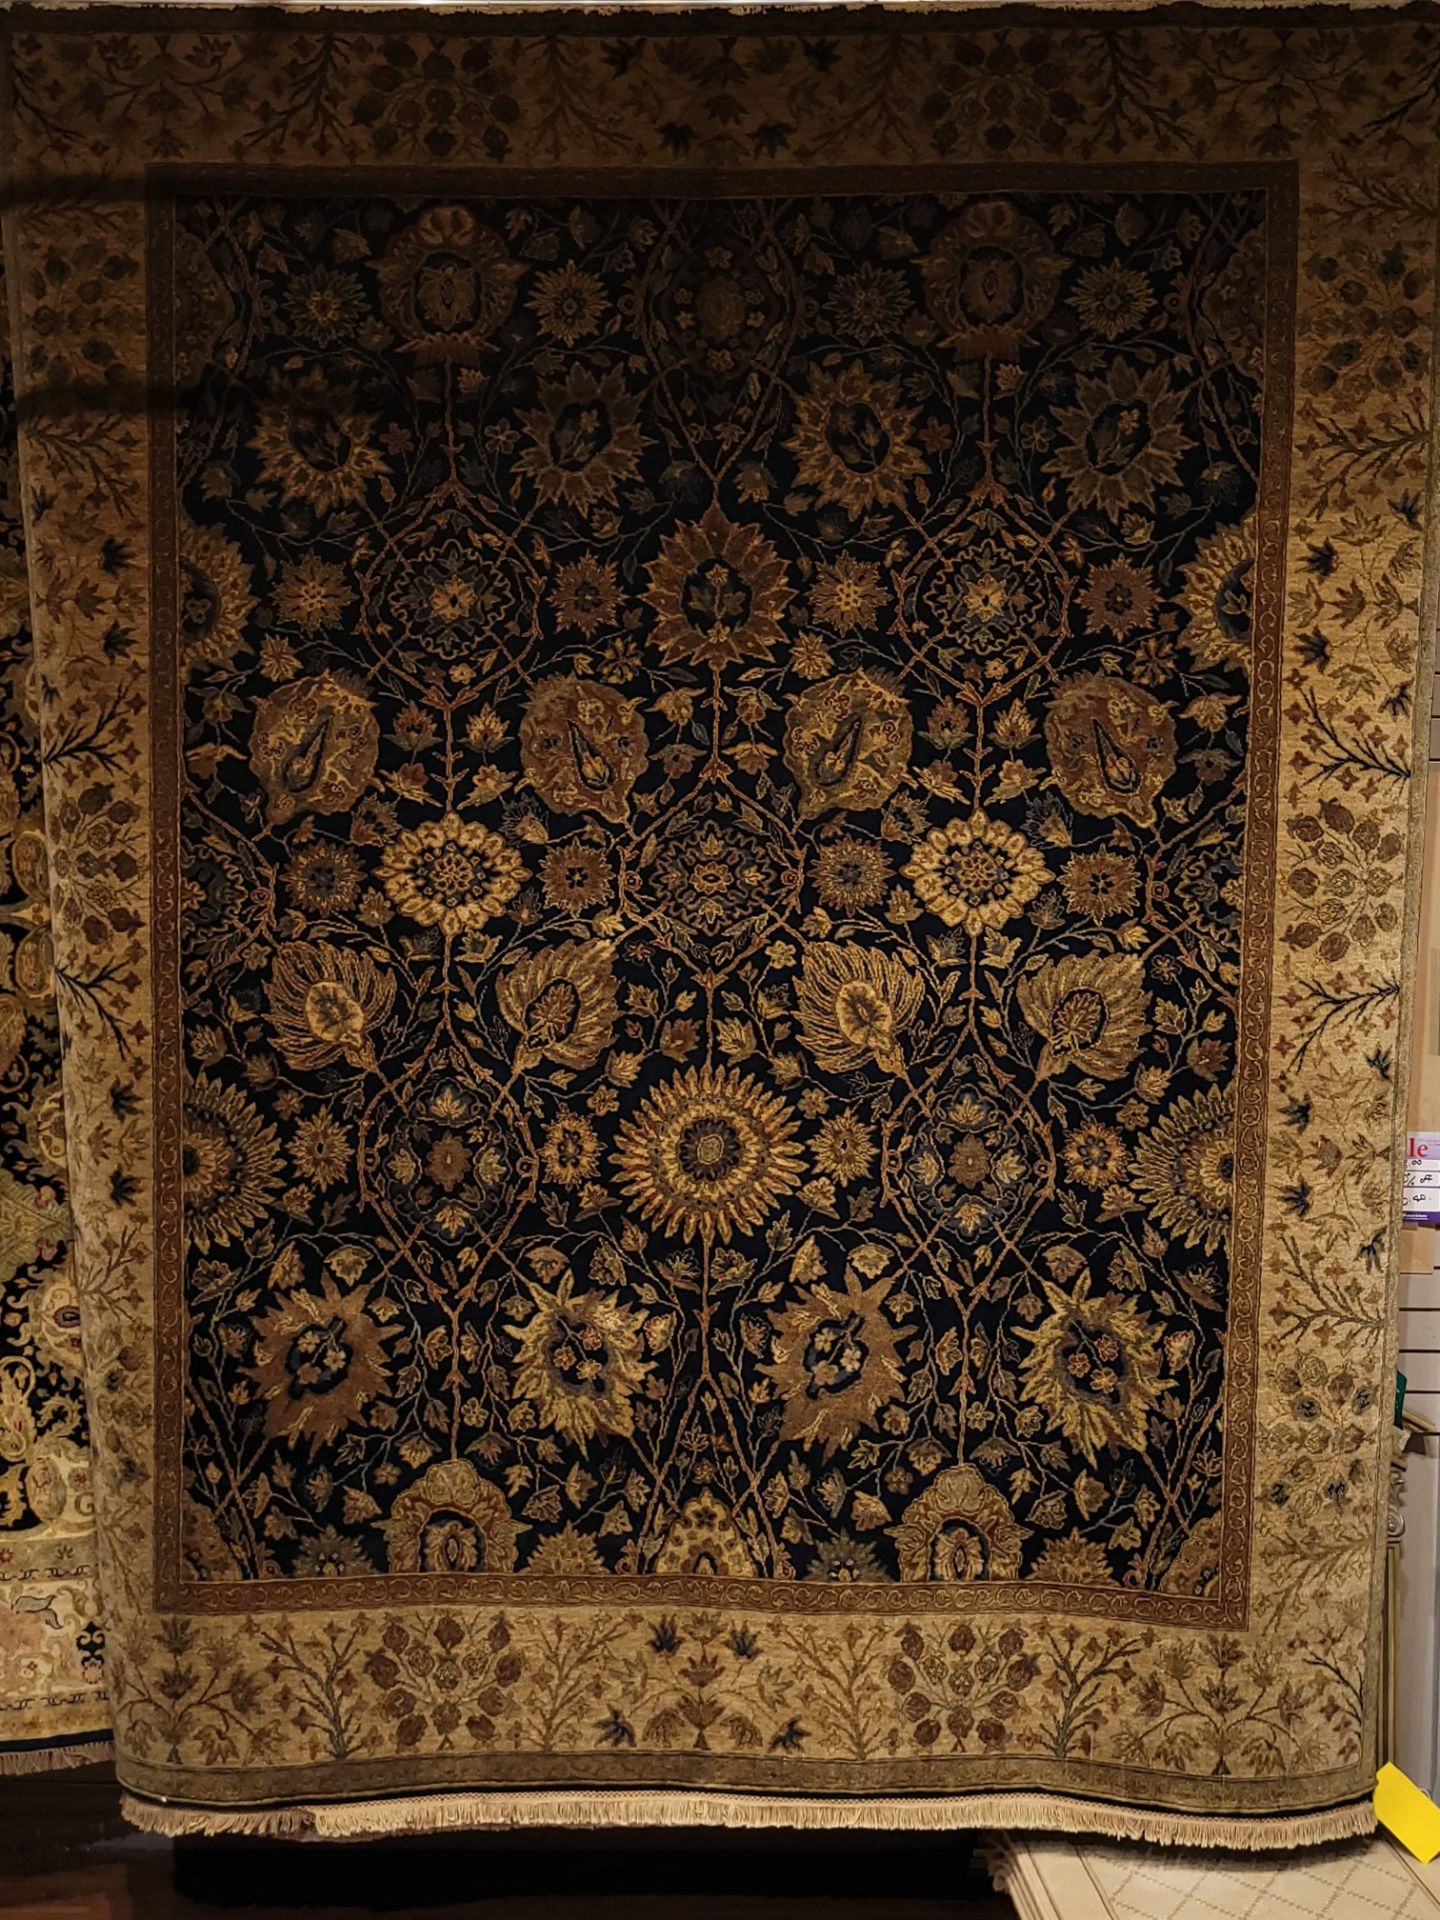 8'03" X 10' FINE WOOL PILE HAND KNOTTED IN INDIA - MSRP $15,998.00 (LOCATED IN GALLERY TWO)